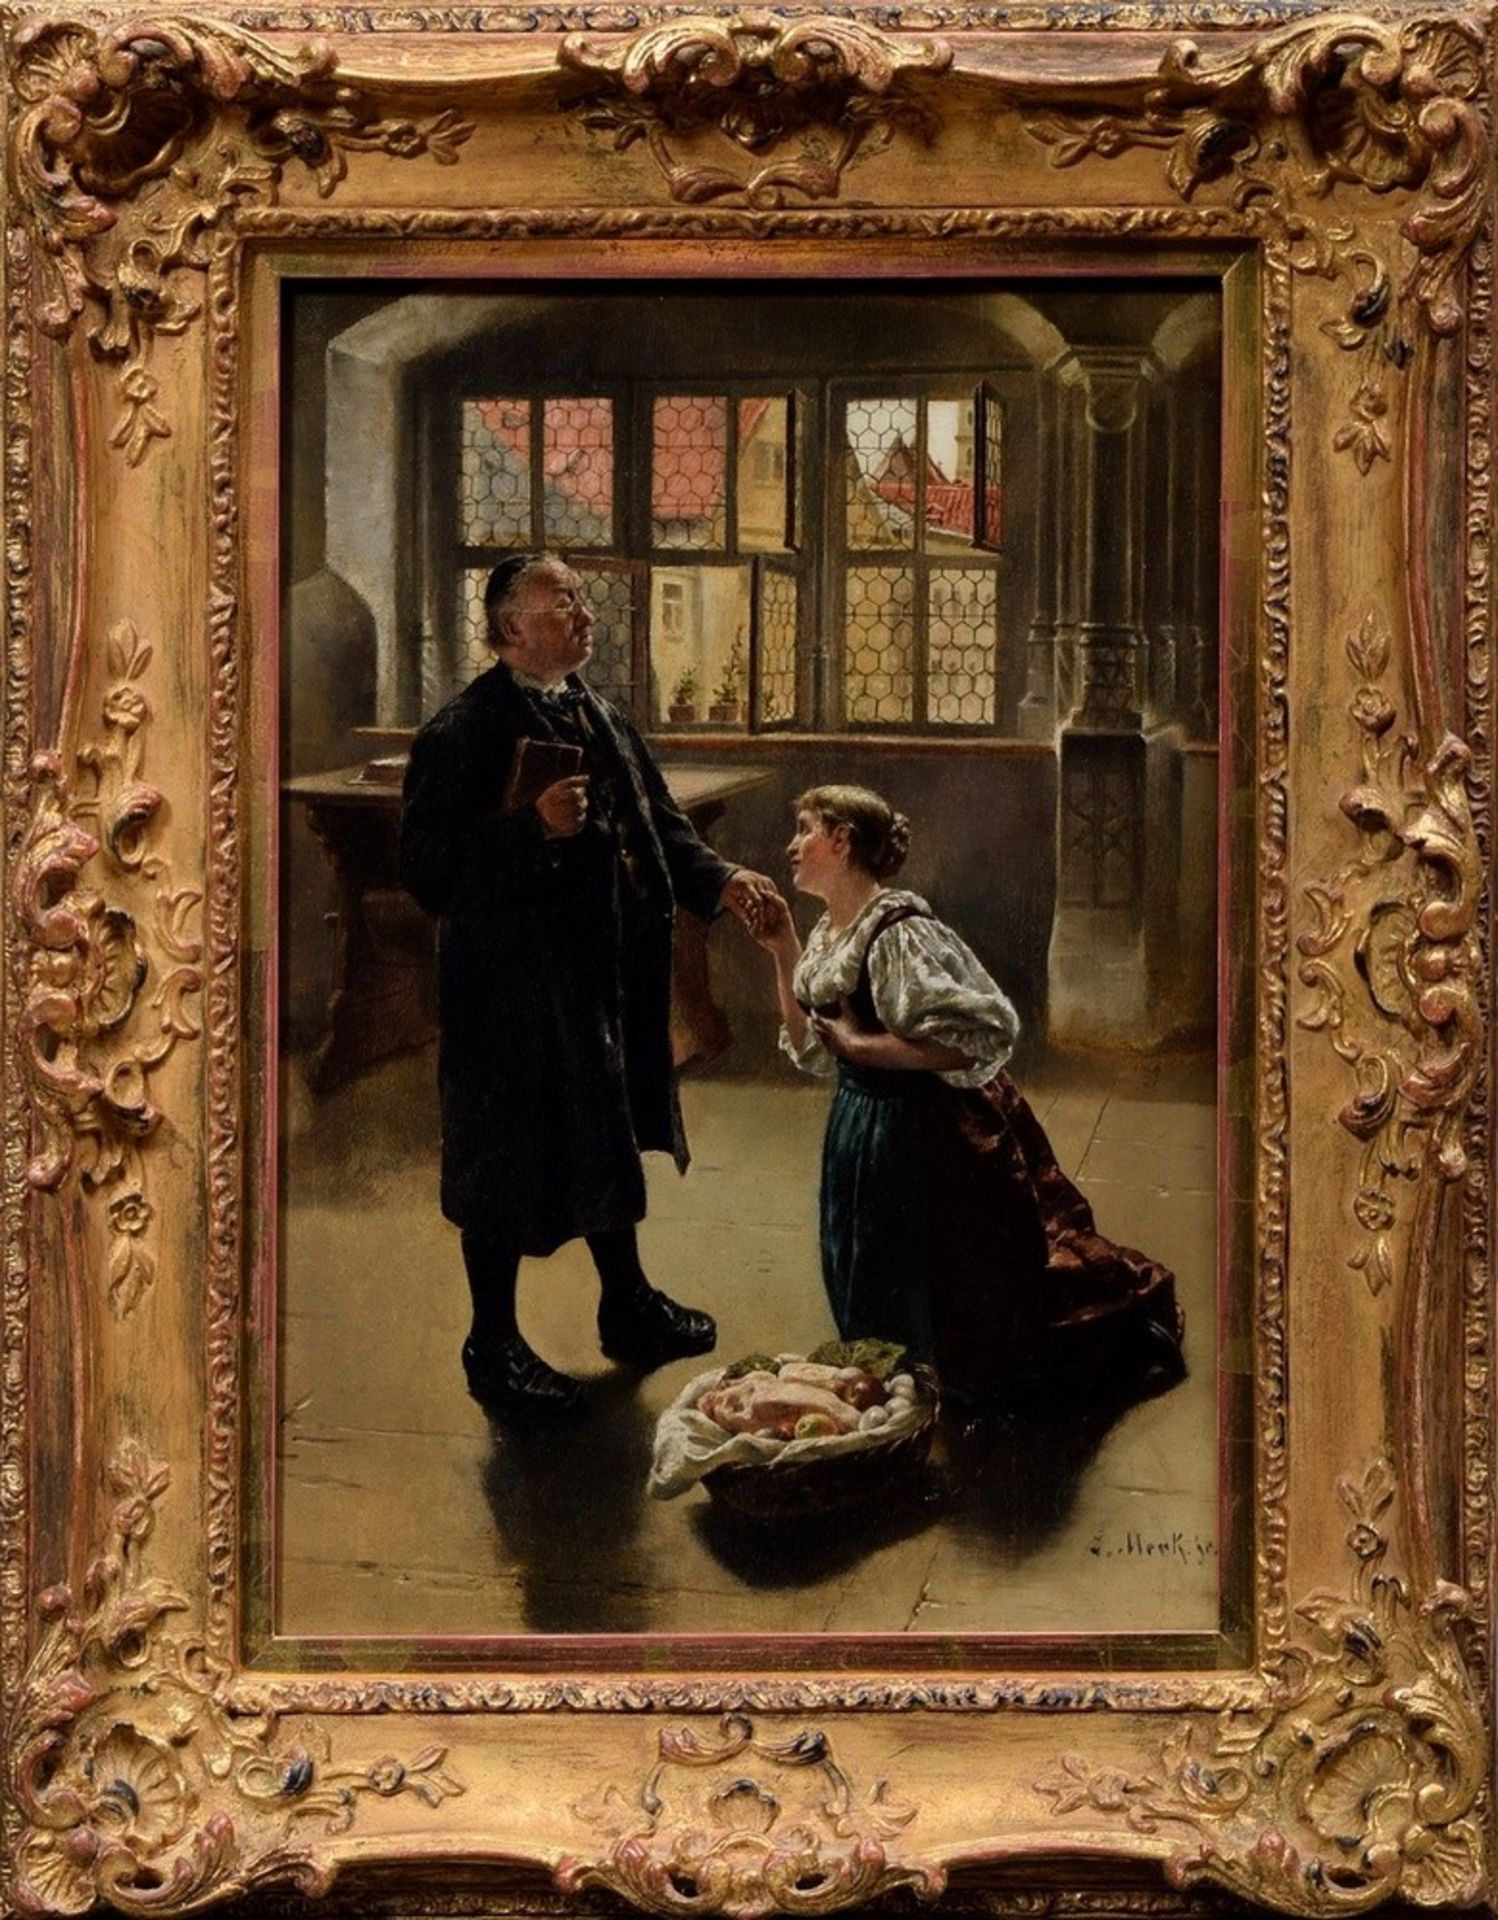 Merker, Eduard (1816-1888) "Intercession", oil/wood, b.r. sign., magnificent frame (rubbed), 33x23c - Image 2 of 7